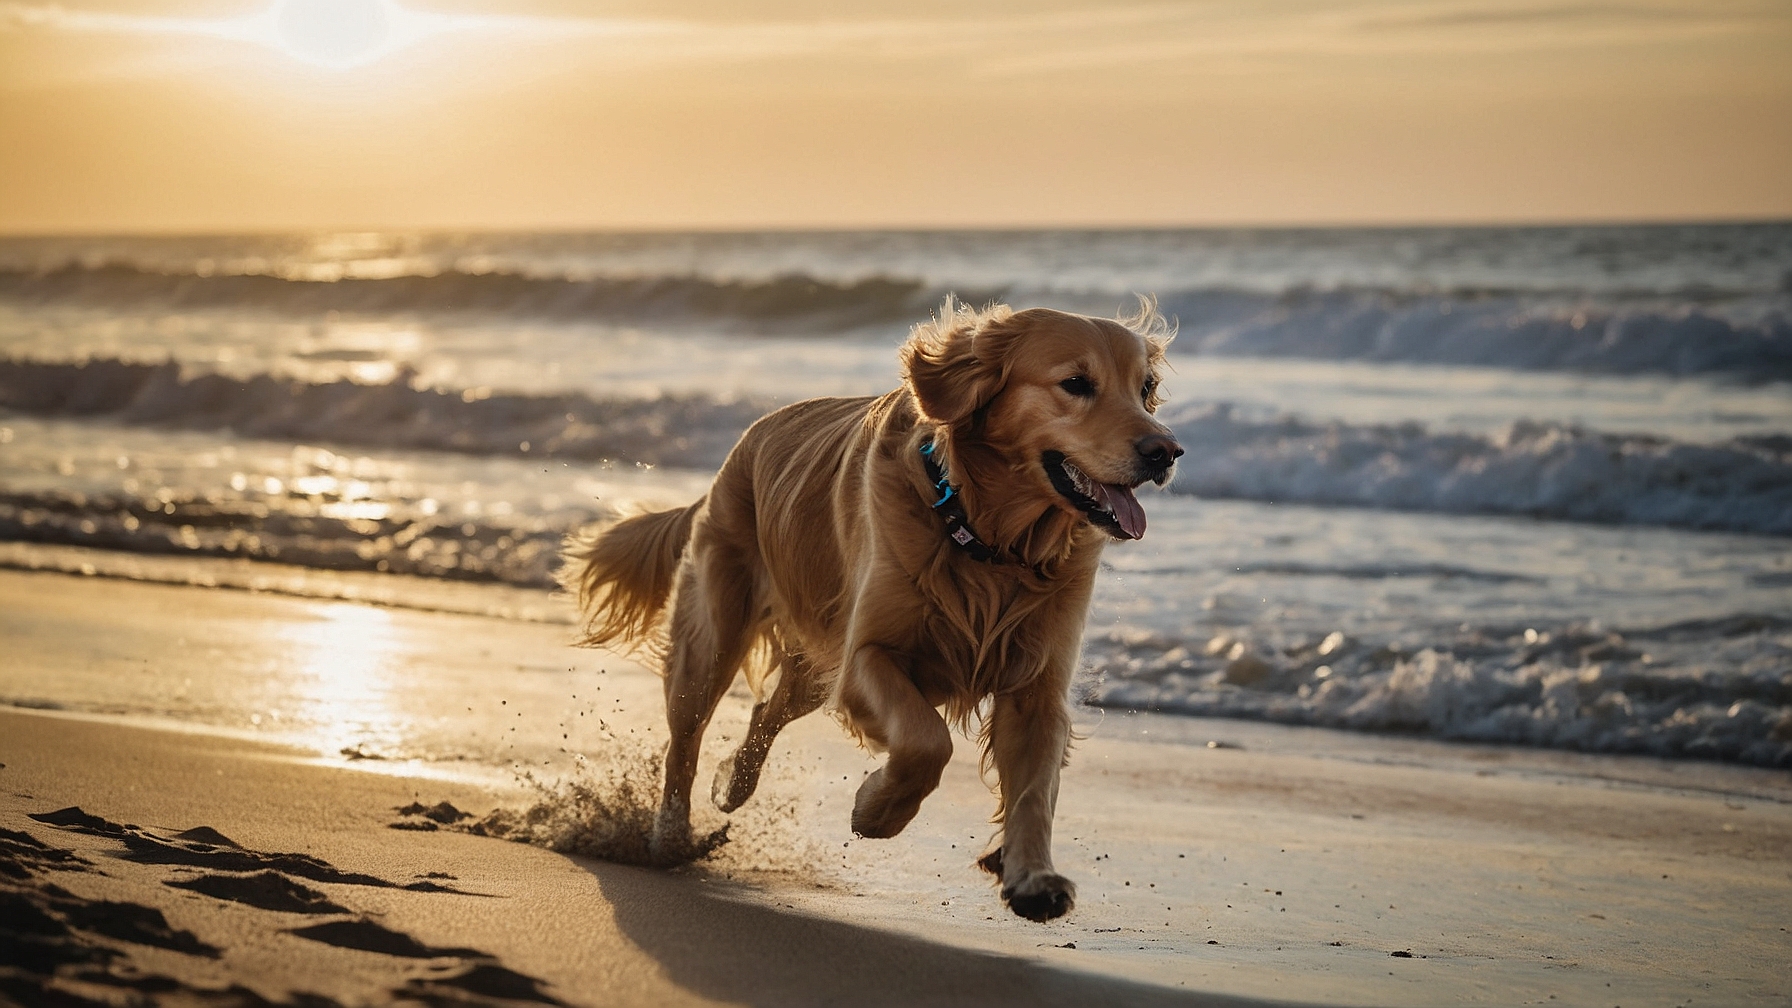 Golden retriever that is running on the beach with a gps tracker on his collar . The dog and the gps collar should be in the foreground